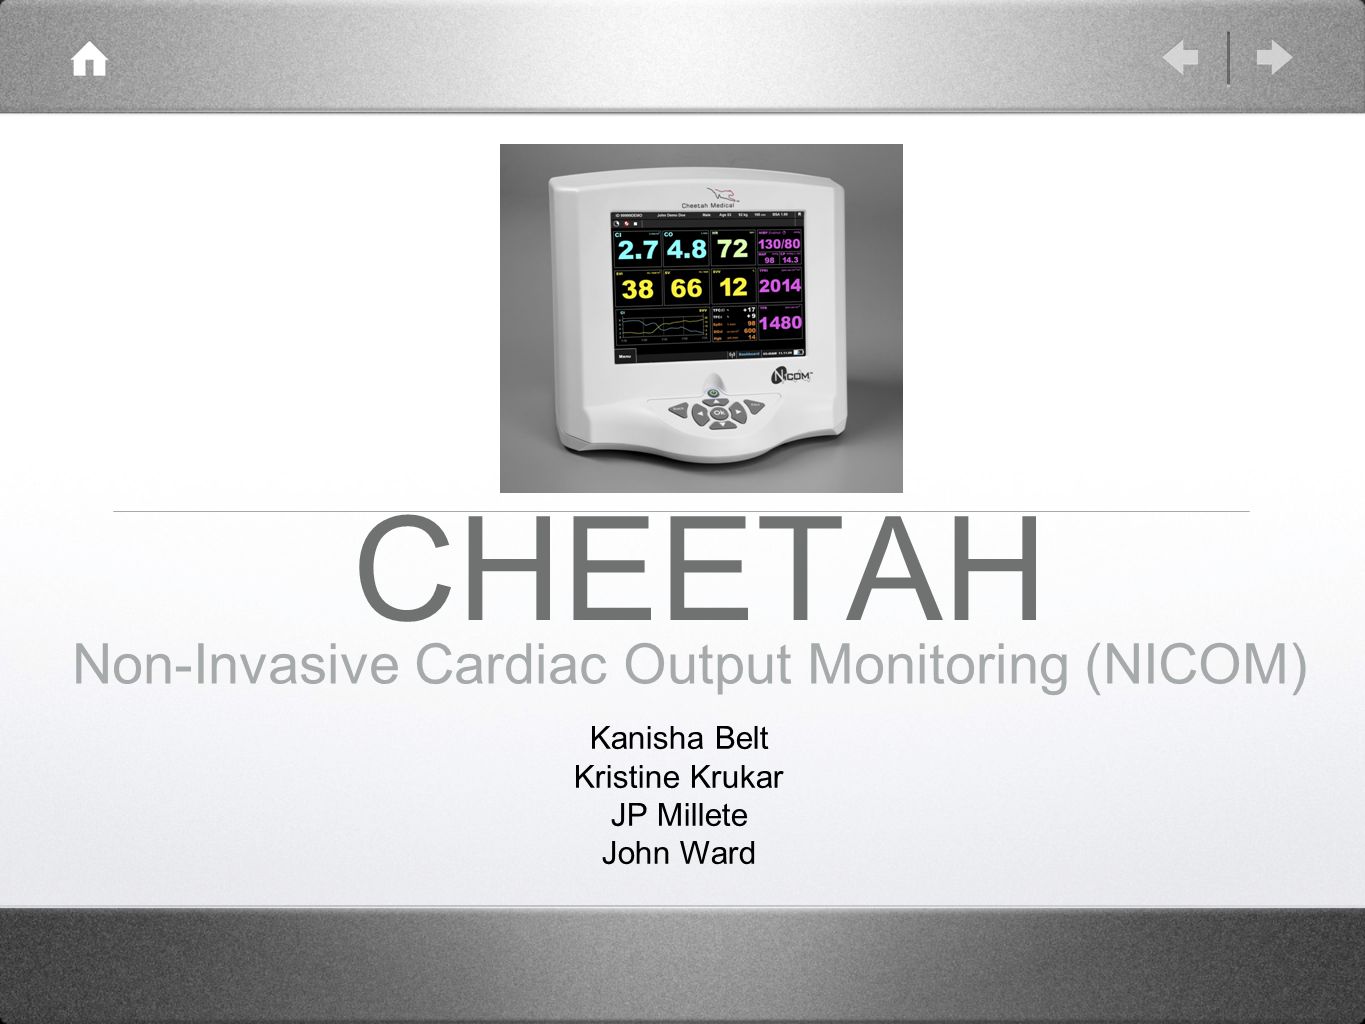 Non-Invasive Cardiac Output Monitoring (NICOM) - ppt video online download